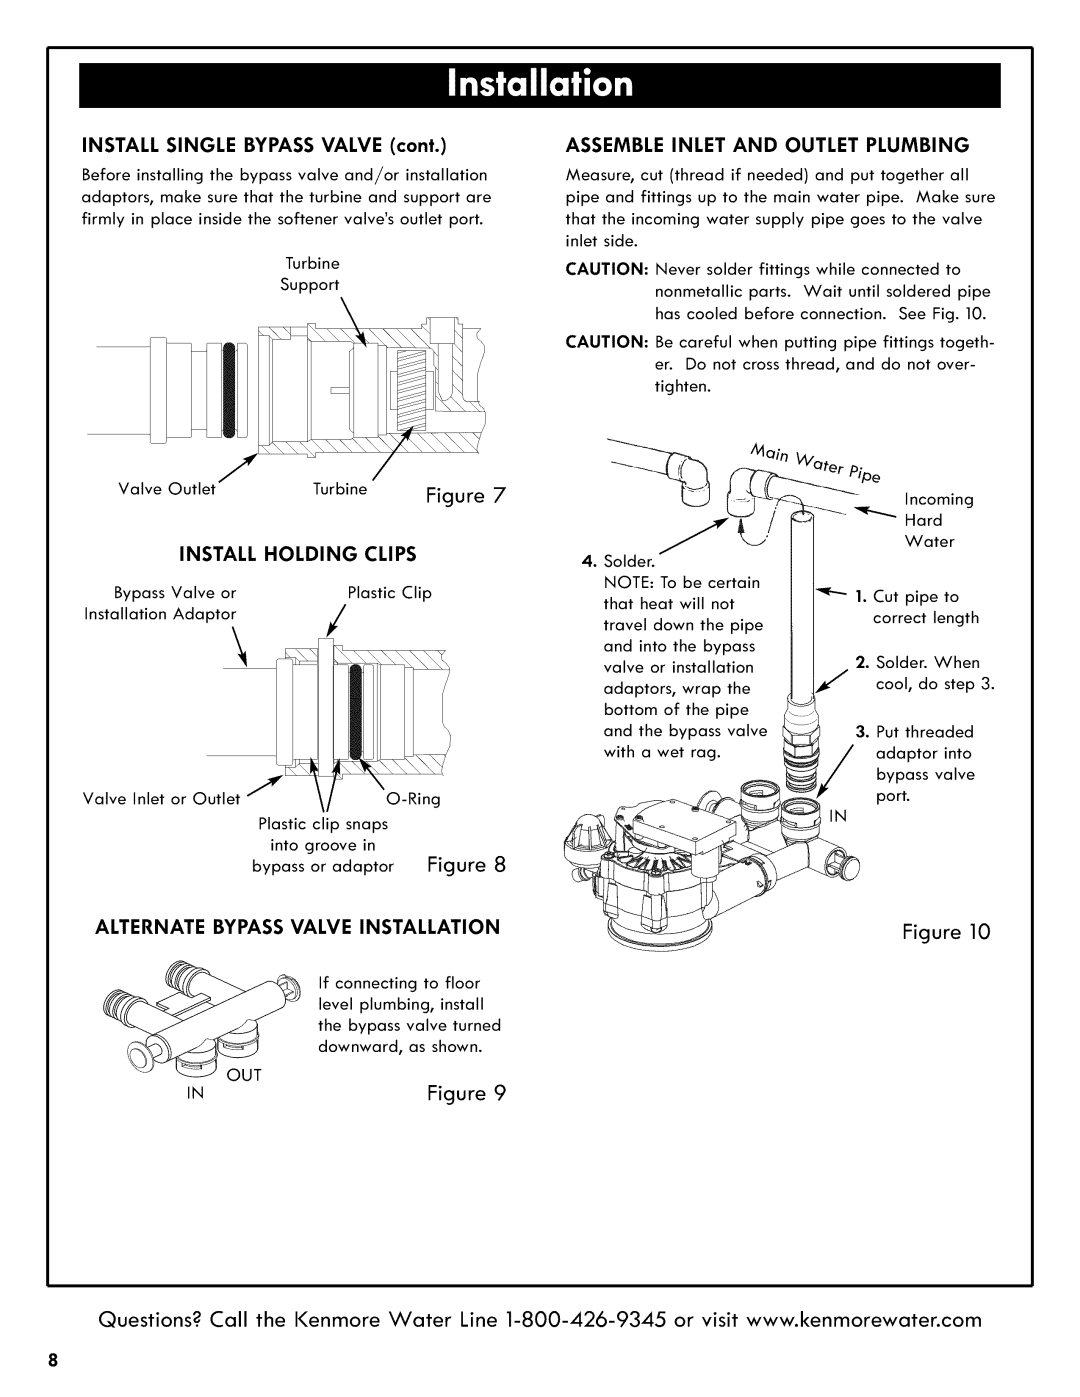 Kenmore 625.3835 manual Assemble Inlet And Outlet Plumbing, Holding Clips, Alternate Bypass Valve Installation 